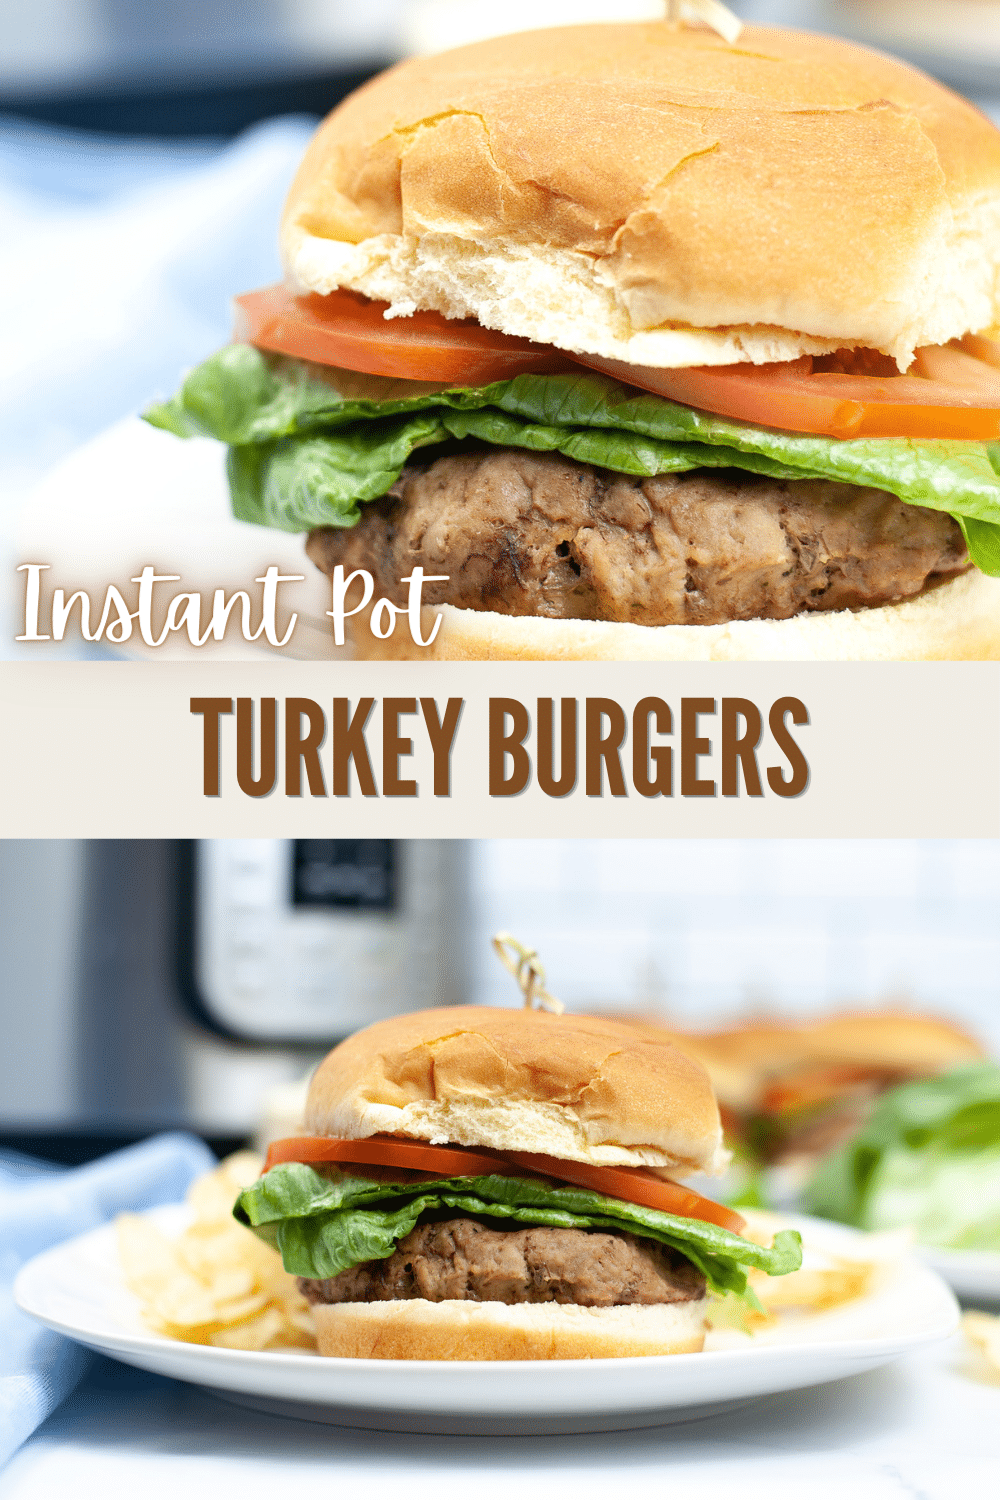 Instant Pot Turkey Burgers are the perfect easy weeknight meal. They are healthy, flavorful, and take only minutes to make! #instantpot #pressurecooker #turkeyburgers #turkey #recipe via @wondermomwannab